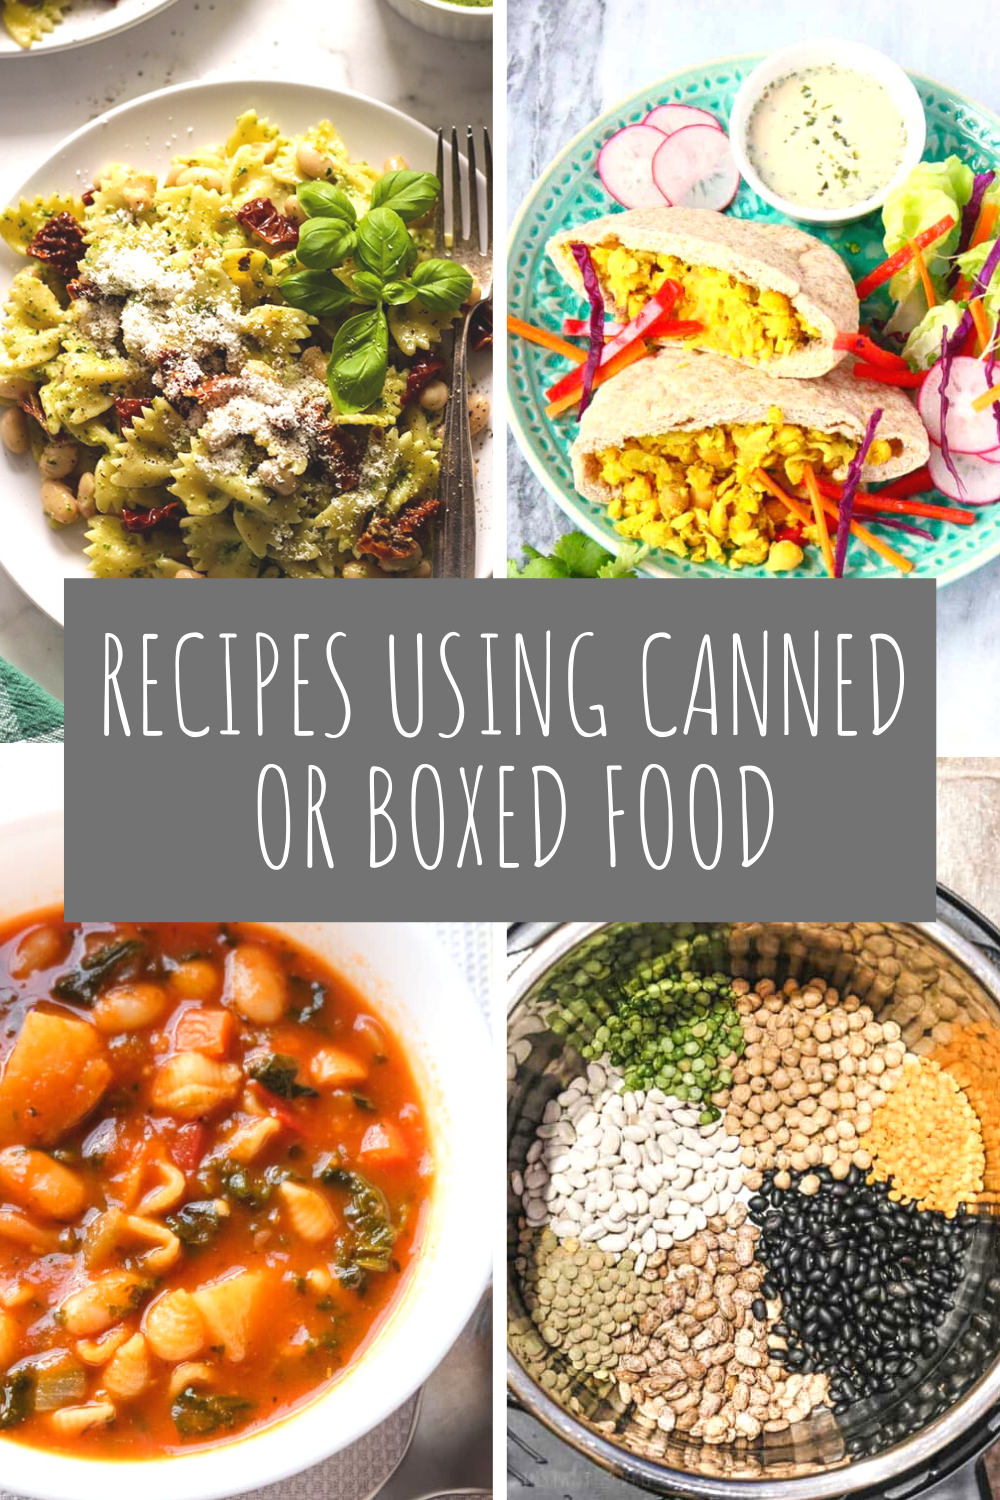 Recipes Using Canned or Boxed Food